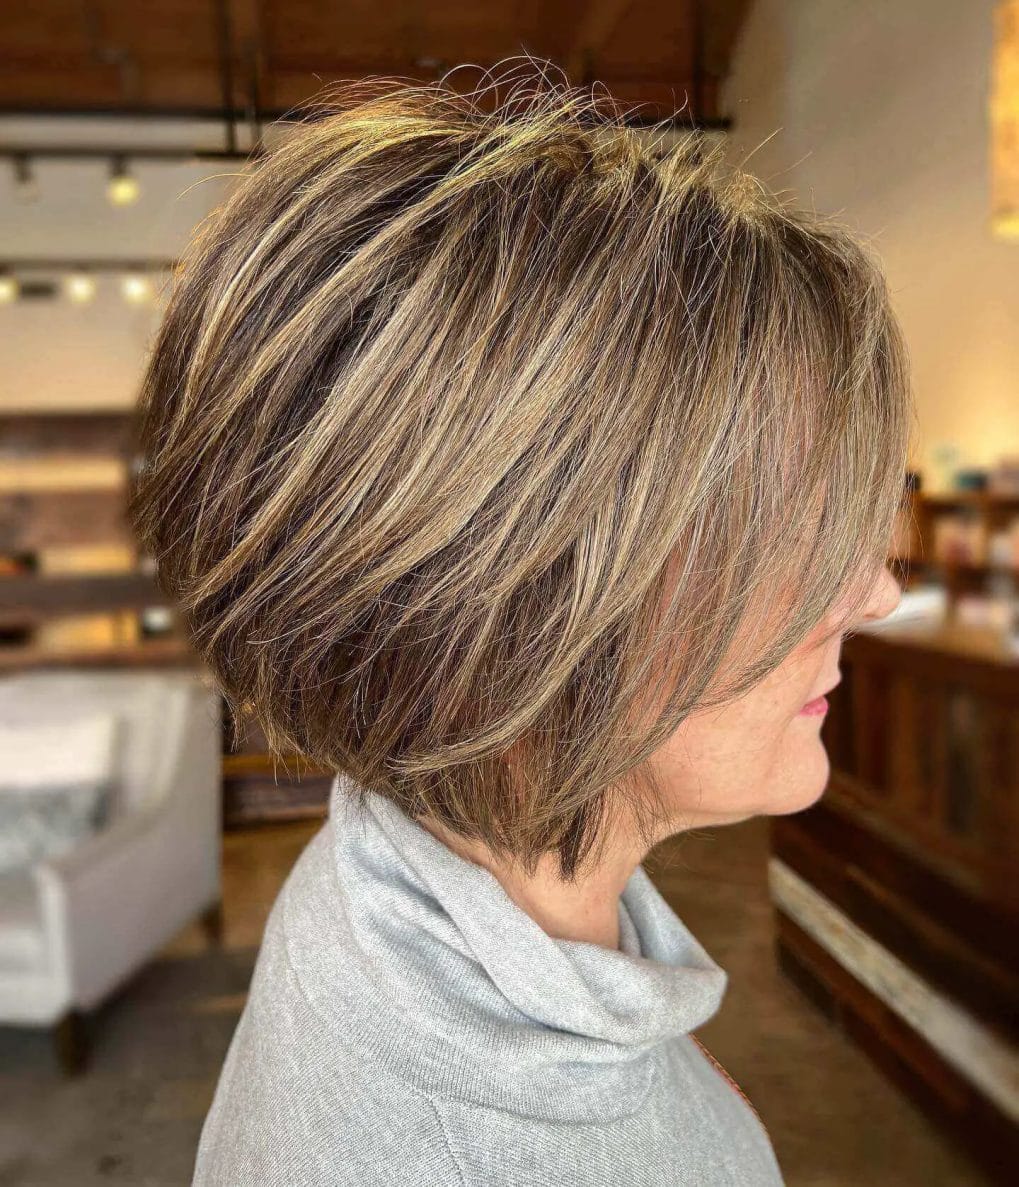 Dynamic layered bob with textured cool blonde and warm brown highlights.